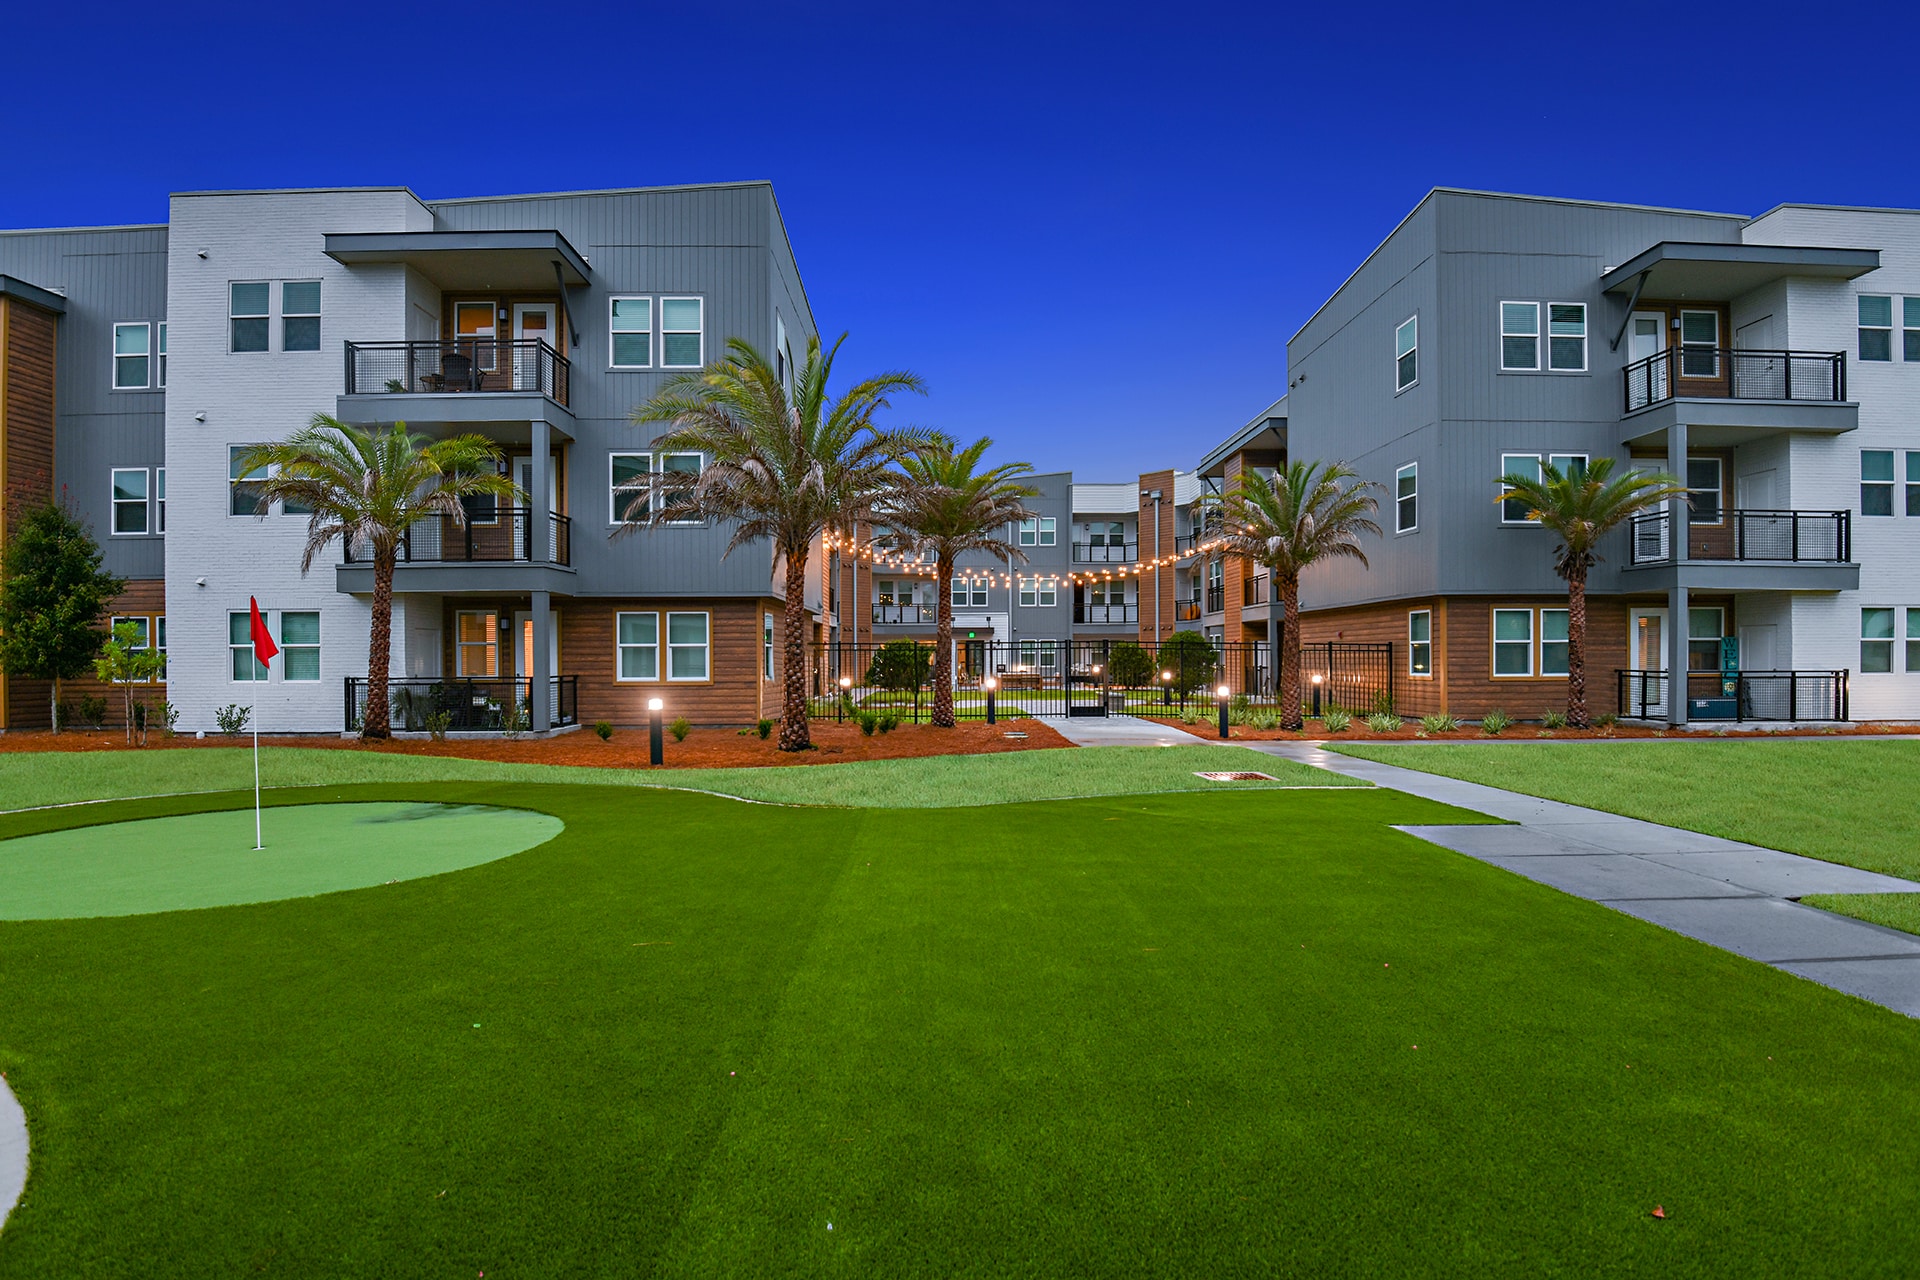 An apartment complex with a golf course in front of it.